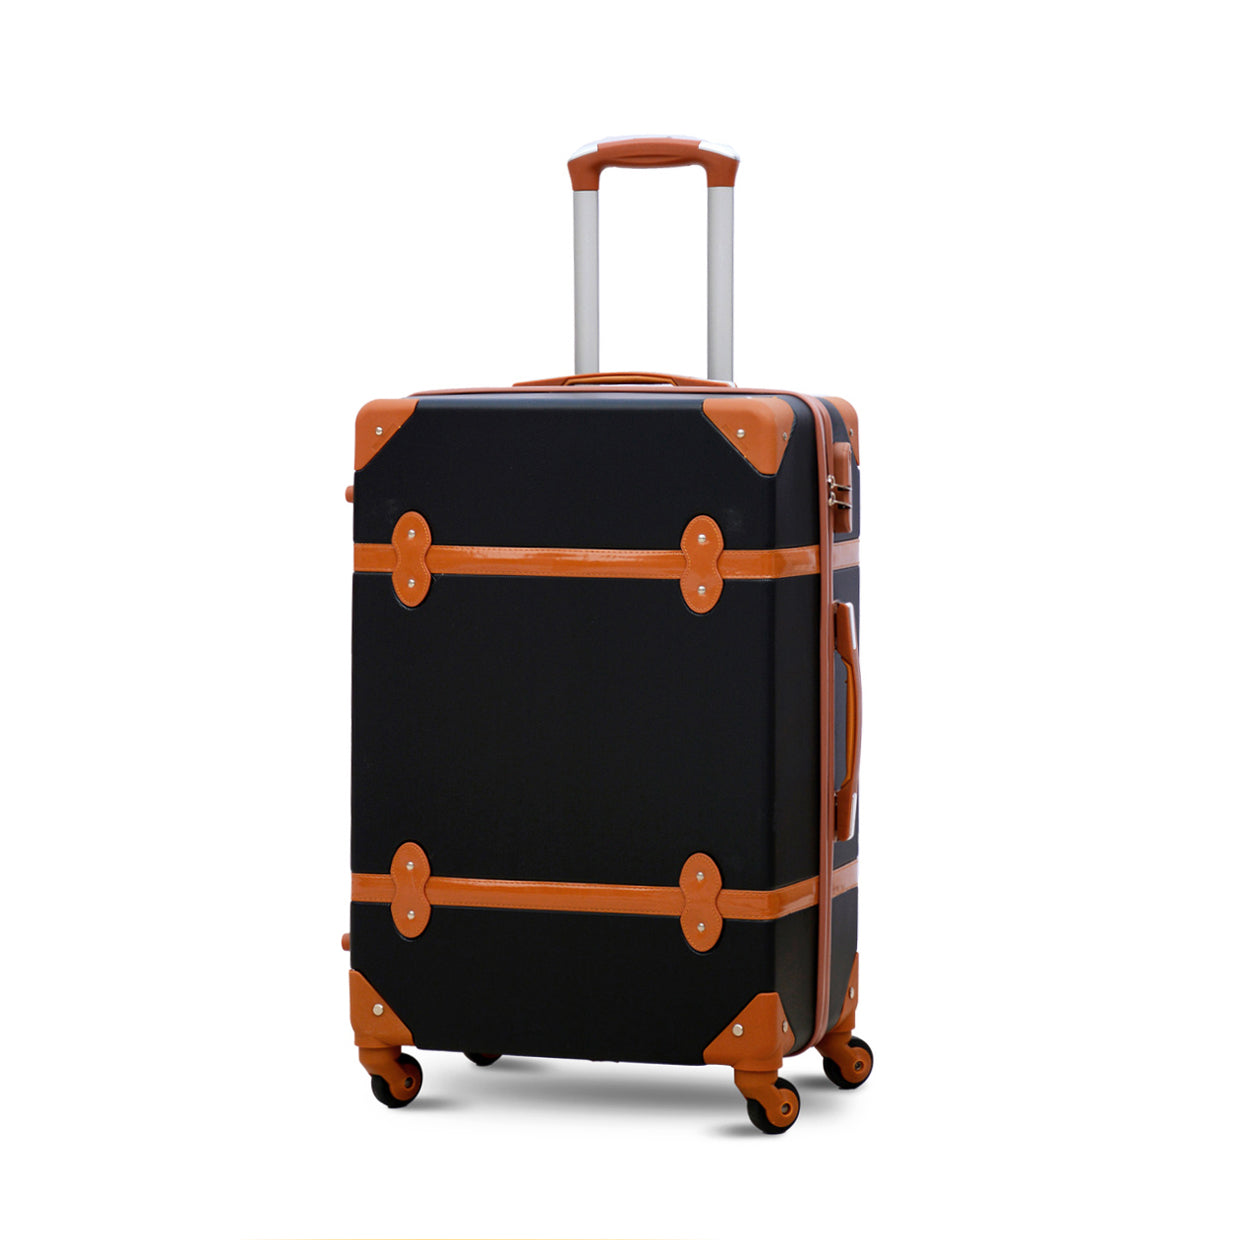  Lightweight ABS Luggage | Corner Guard Black and Brown Zaappy